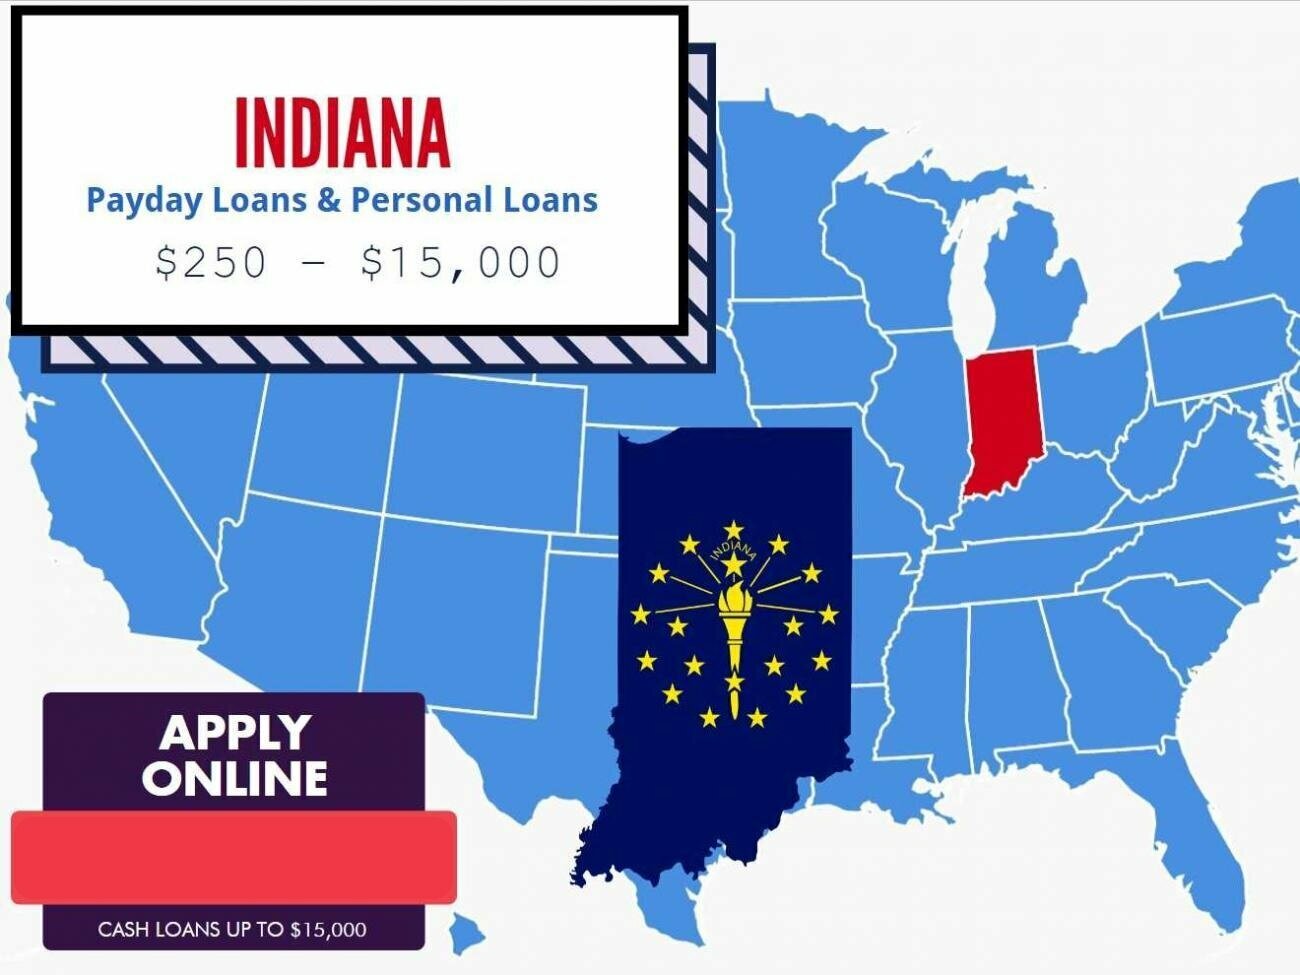 Indiana CASH ADVANCE - Payday Loans & Personal Loans